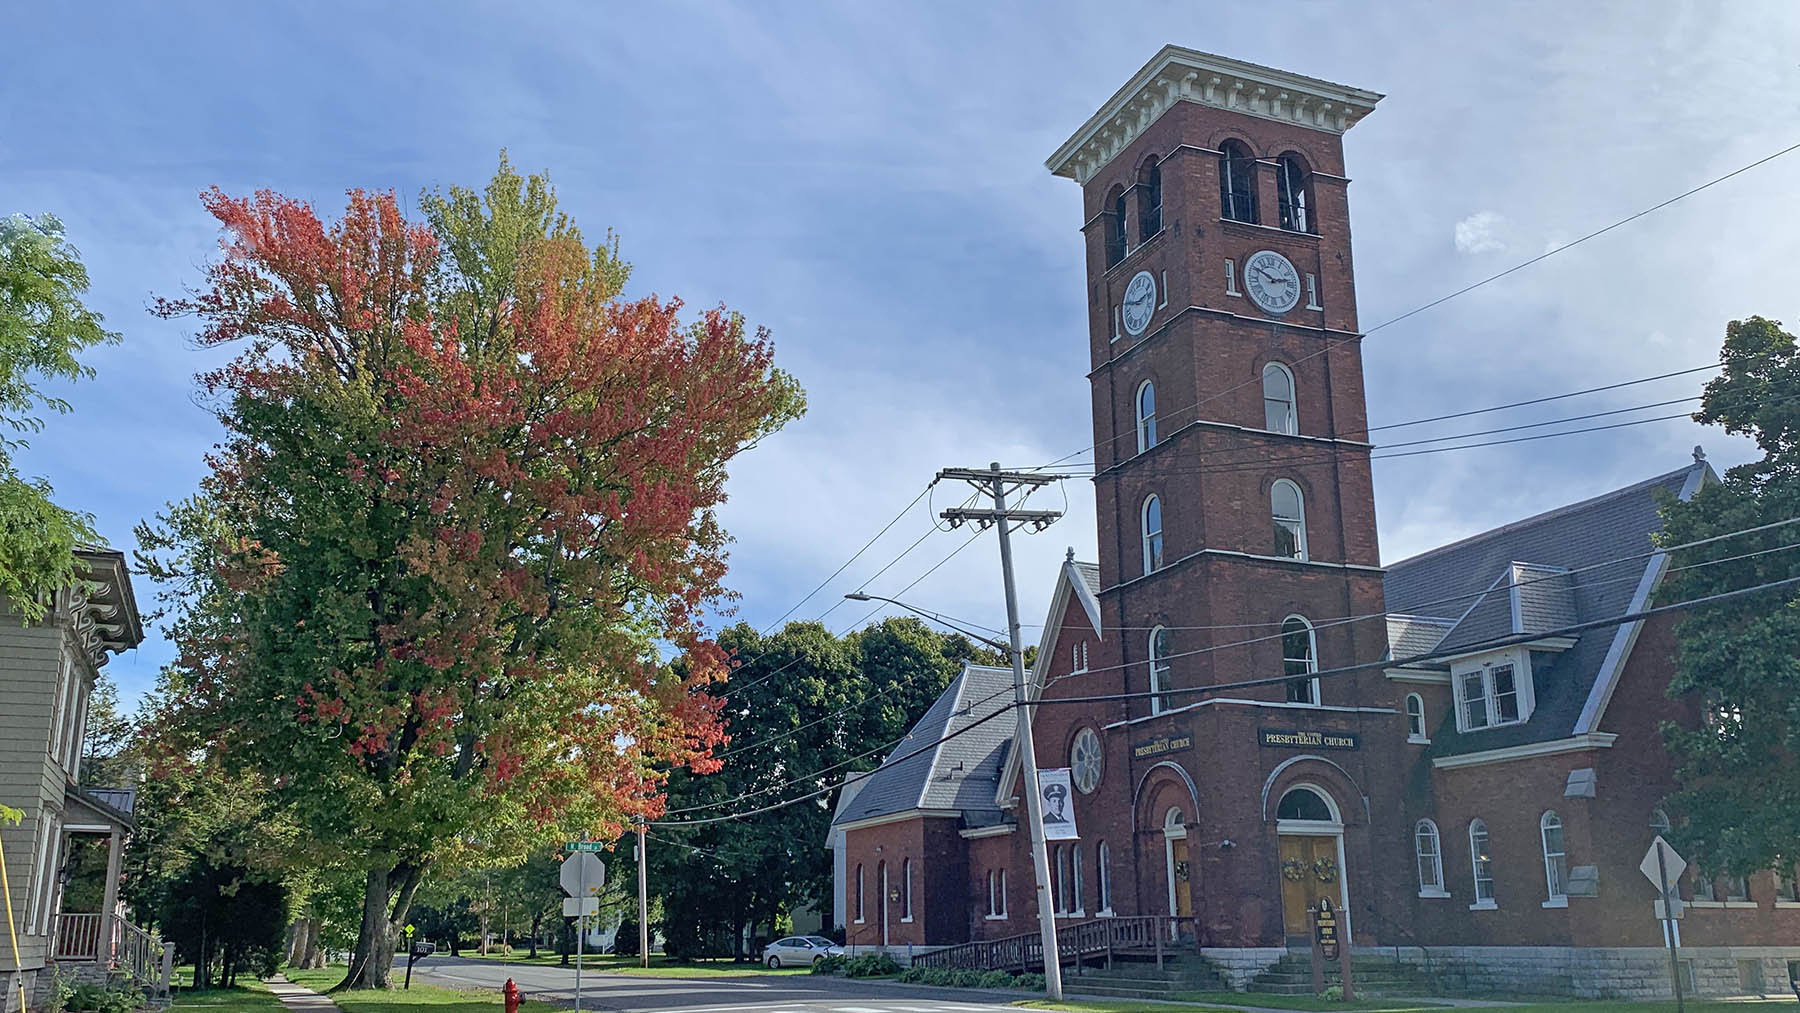 Photo of the United Presbyterian Church at the corner of South Broad and East Main Streets in Sackets Harbor in the fall